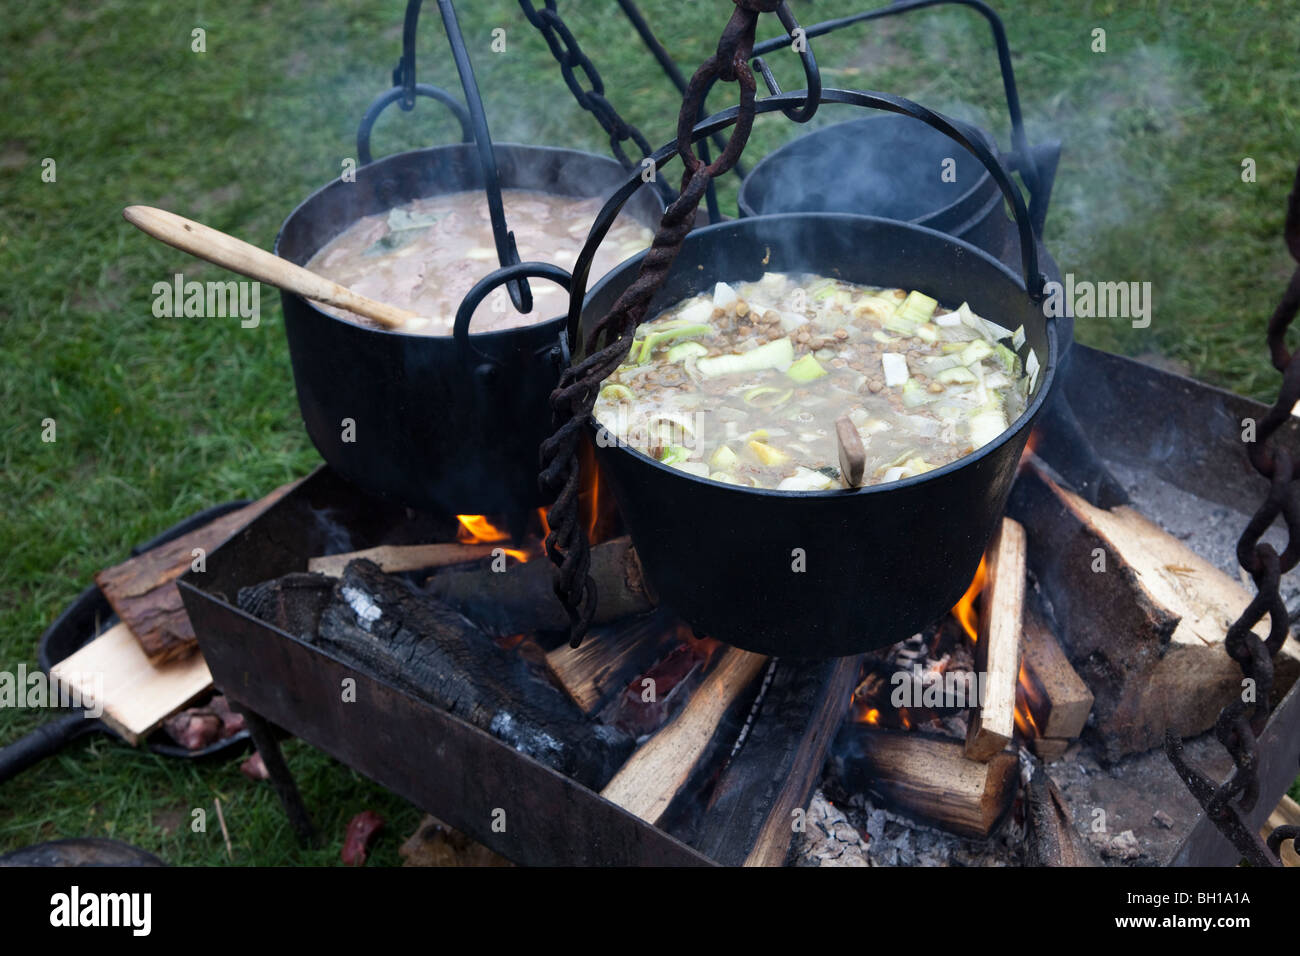 Cooking broth over wood fire Mediaeval Christmas market Caerphilly Wales UK Stock Photo